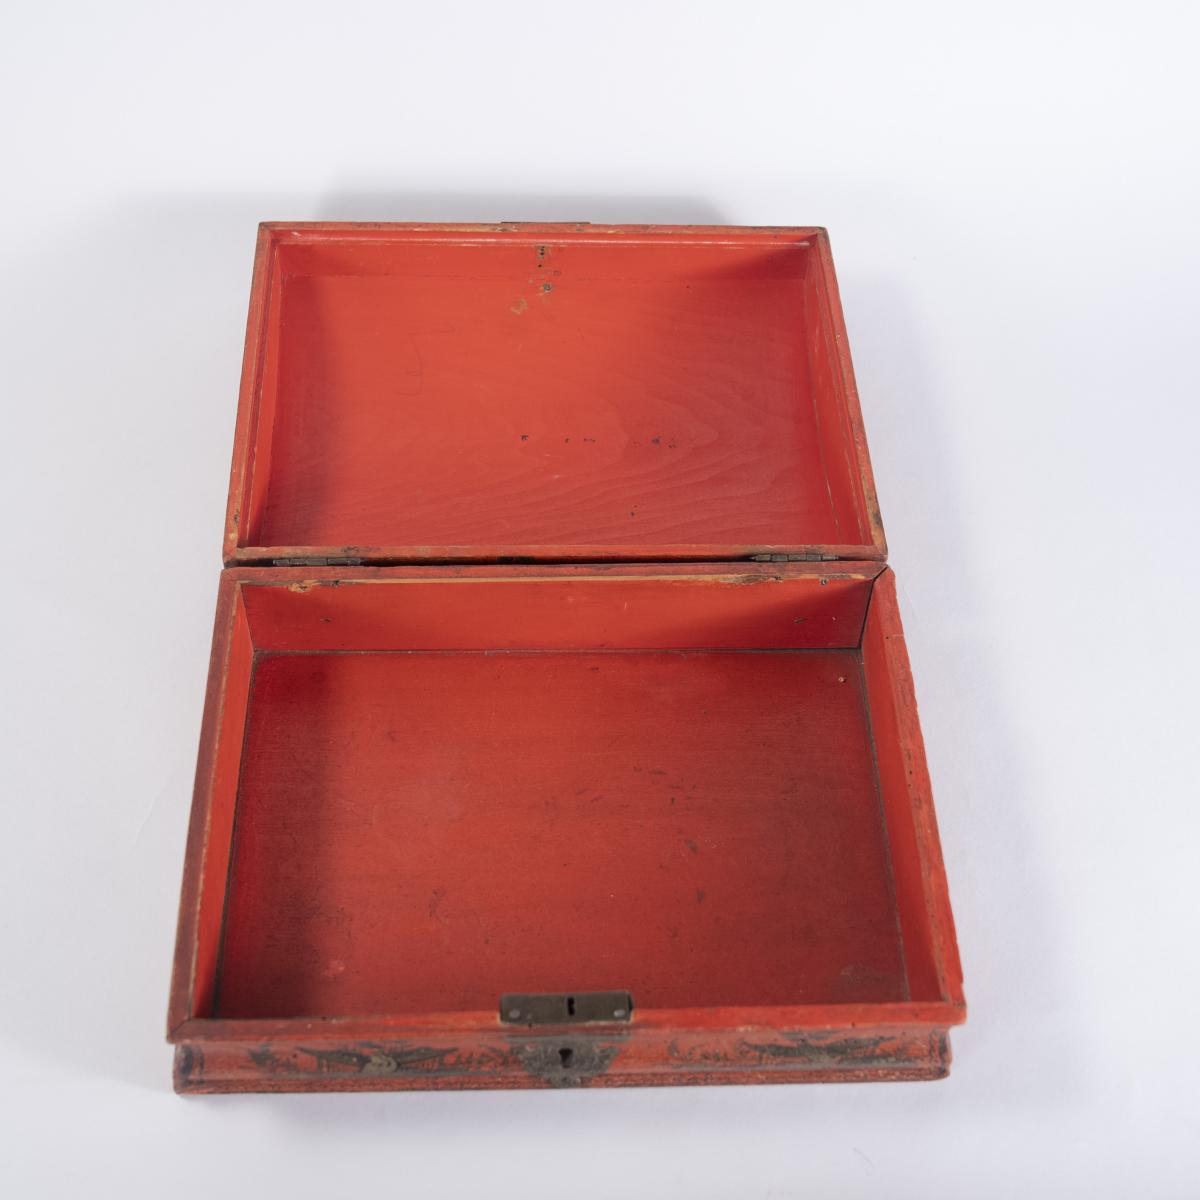 An early 18 century red lacquered bath box circa 1720 to 1750